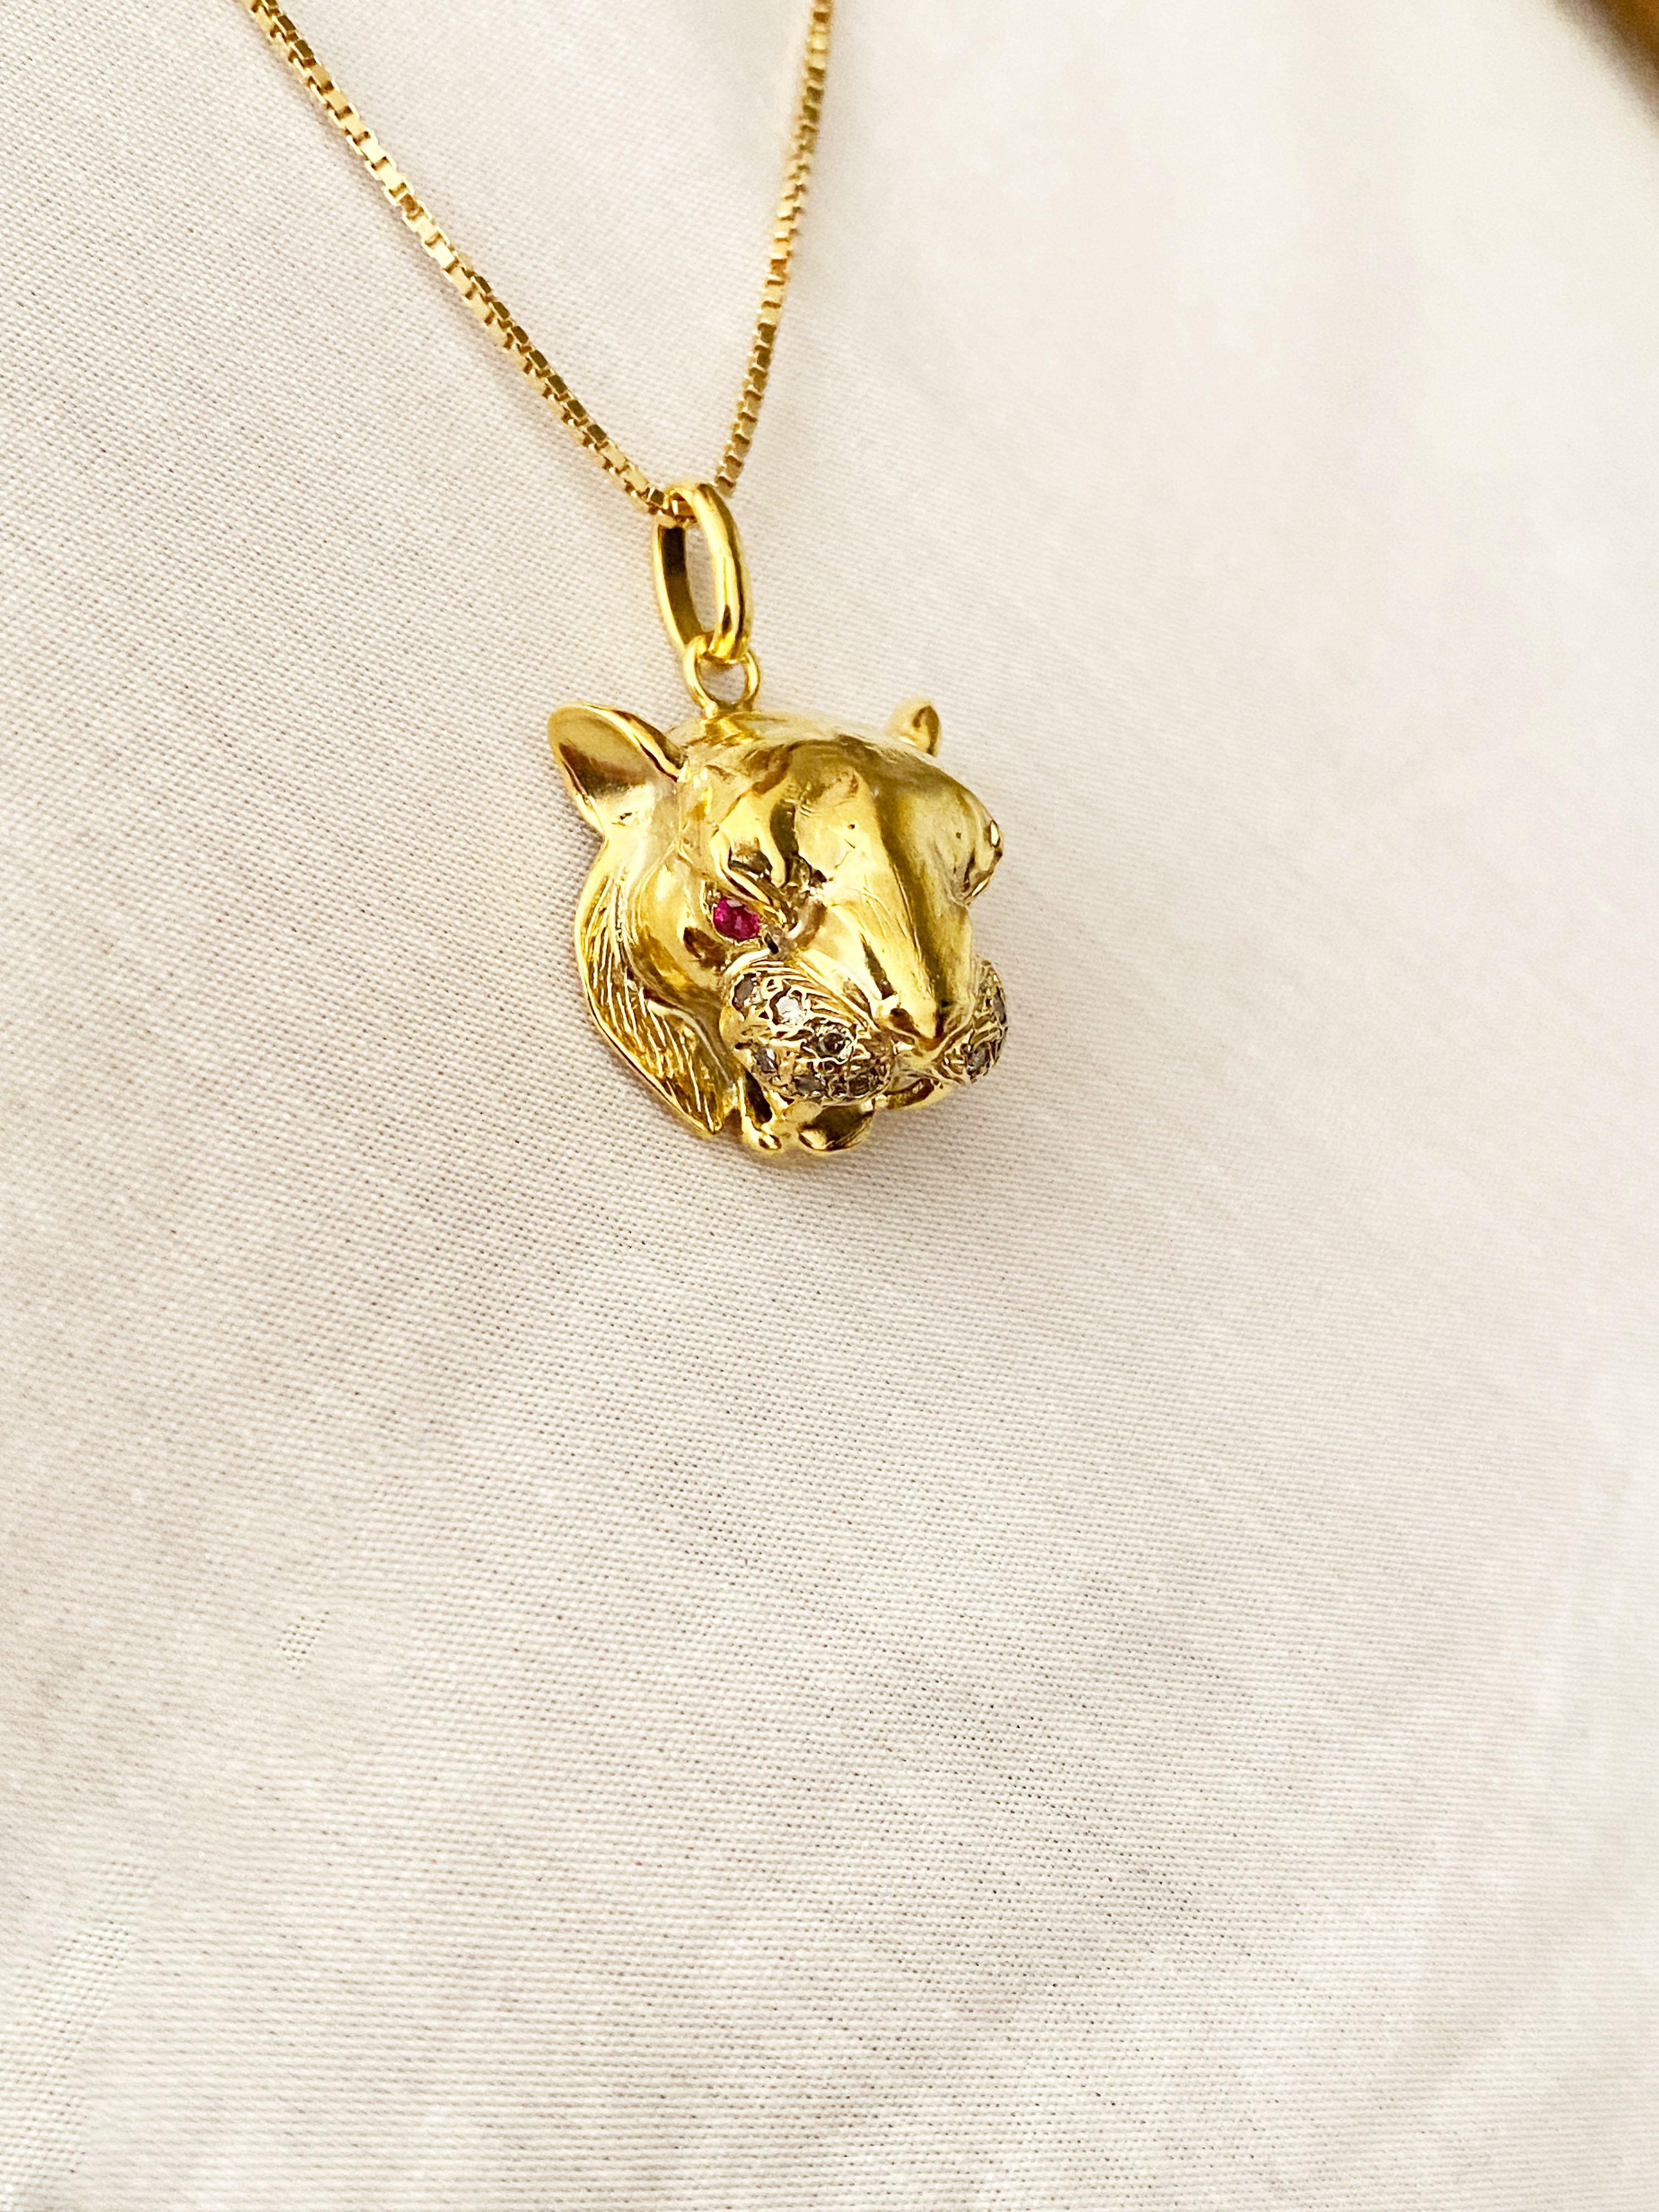 18K Gold Power Tiger Pendant Cube Chain Rubies Diamonds Handcrafted in Italy  For Sale 4